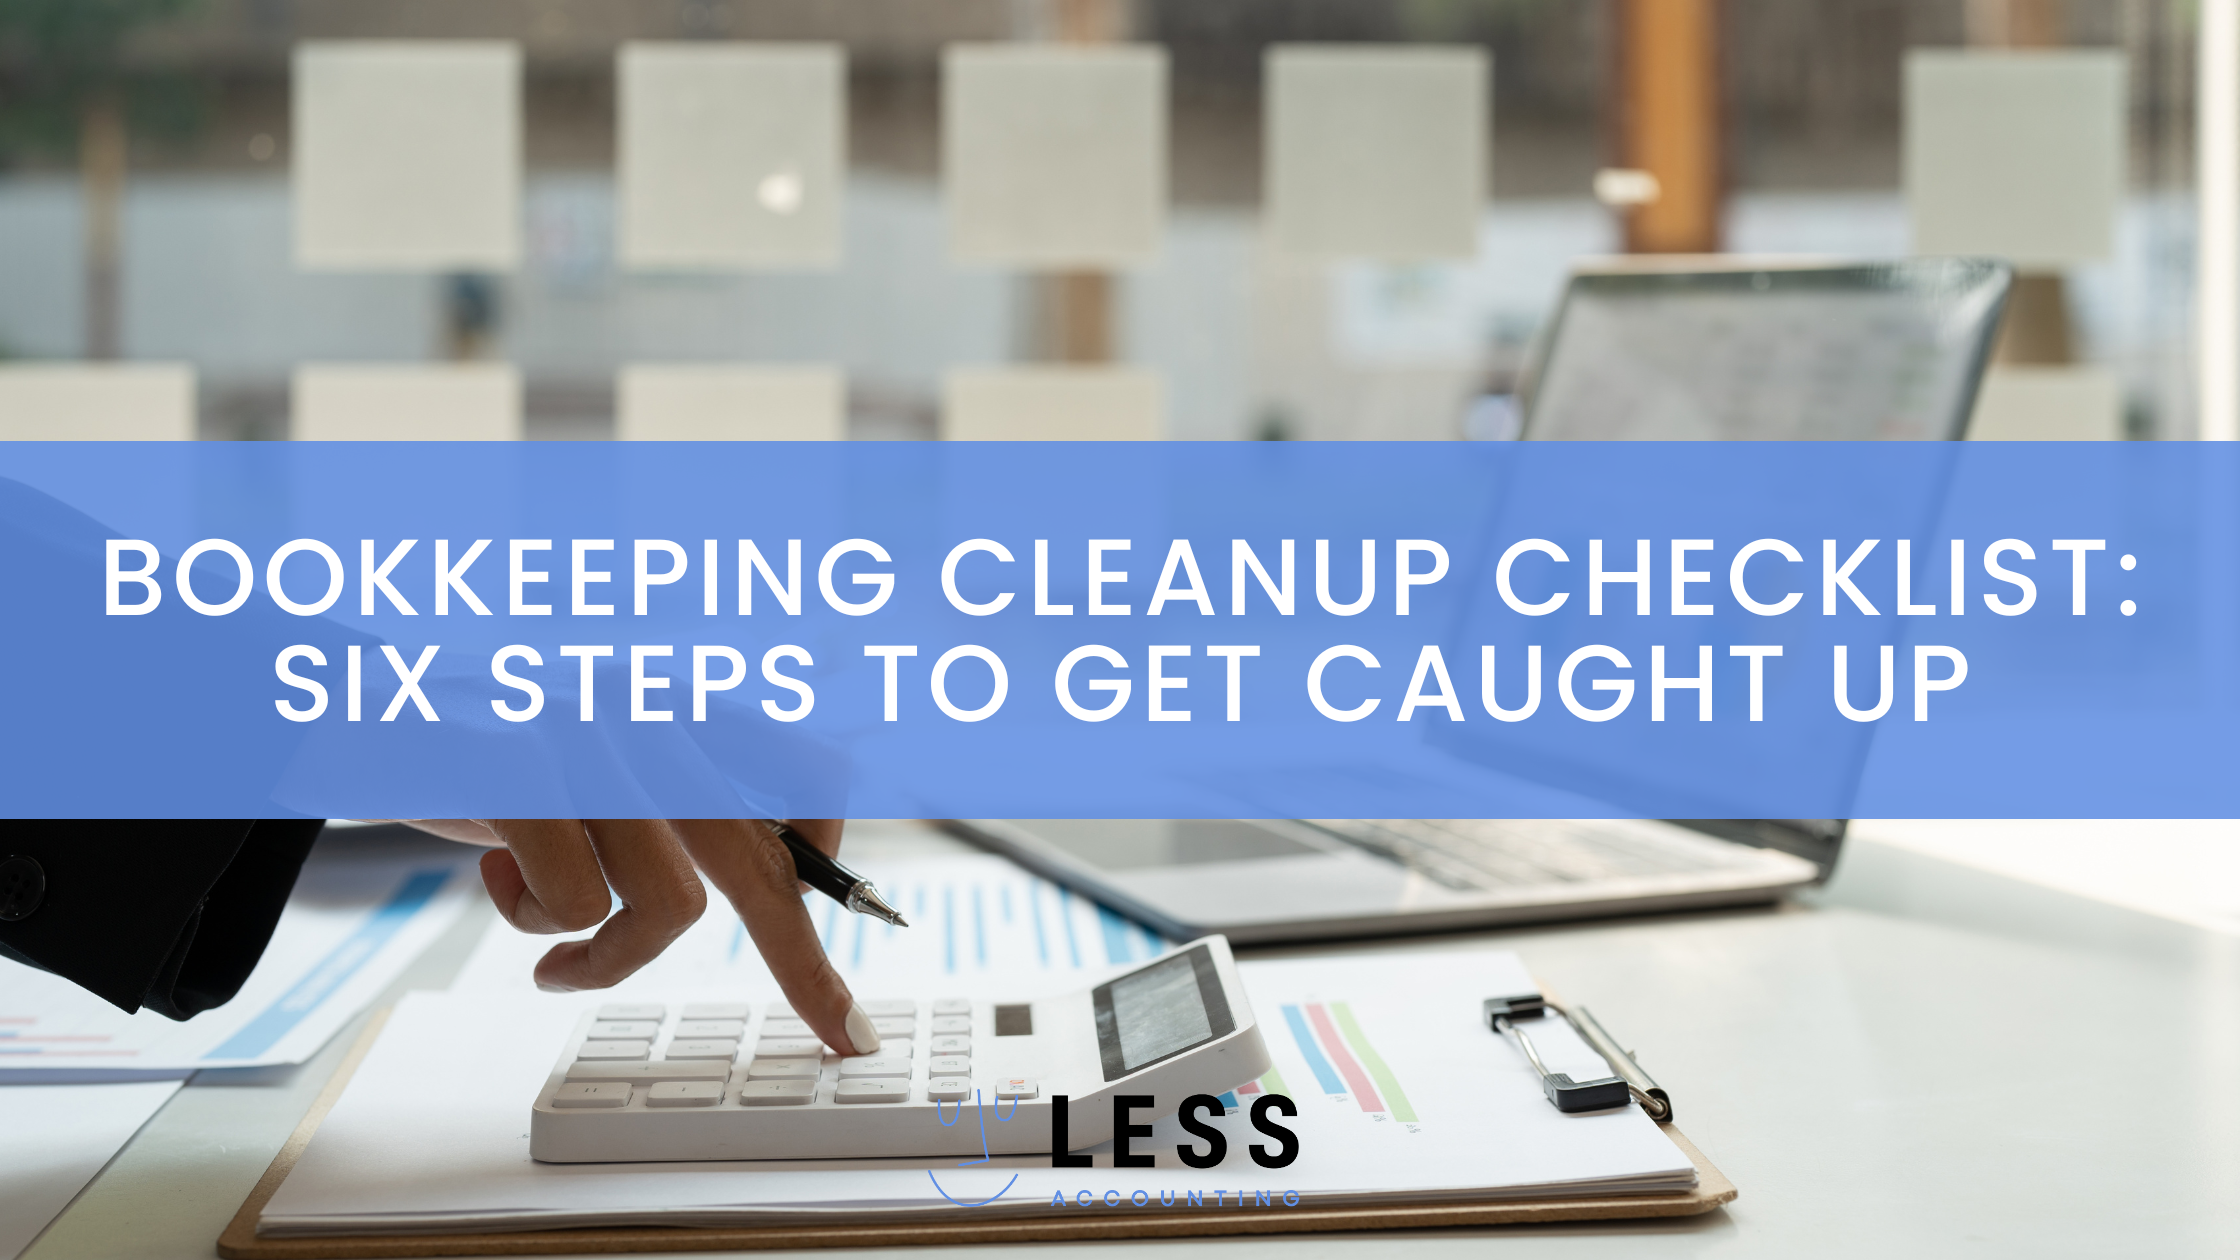 Bookkeeping Cleanup Checklist: Six Steps to Get Caught Up